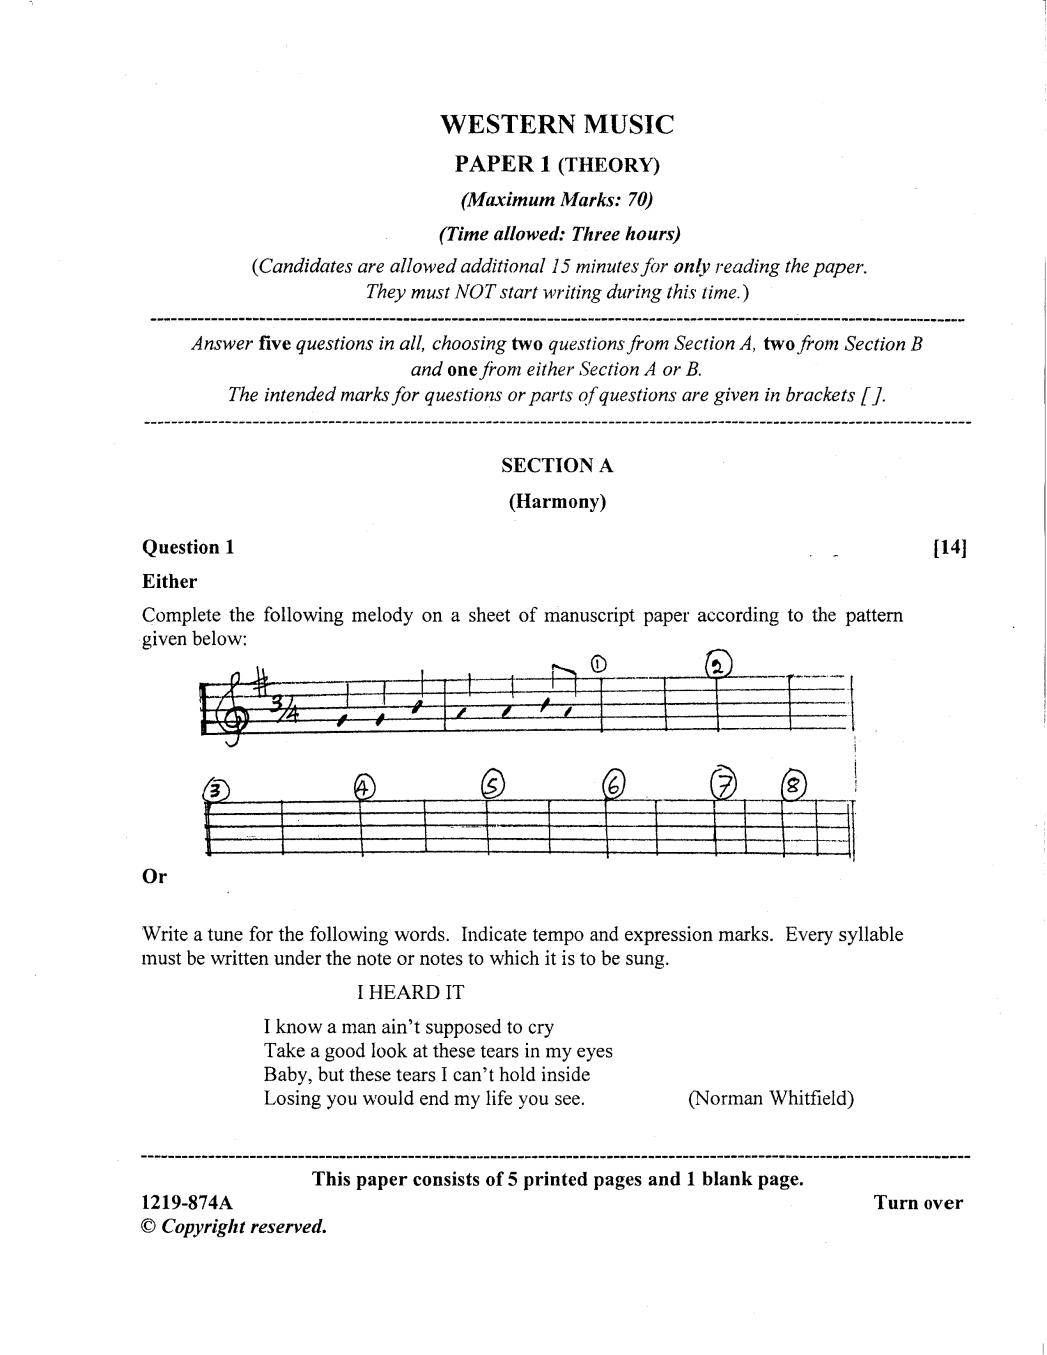 ISC Class 12 Question Paper 2019 for Western Music Theory  - Page 1